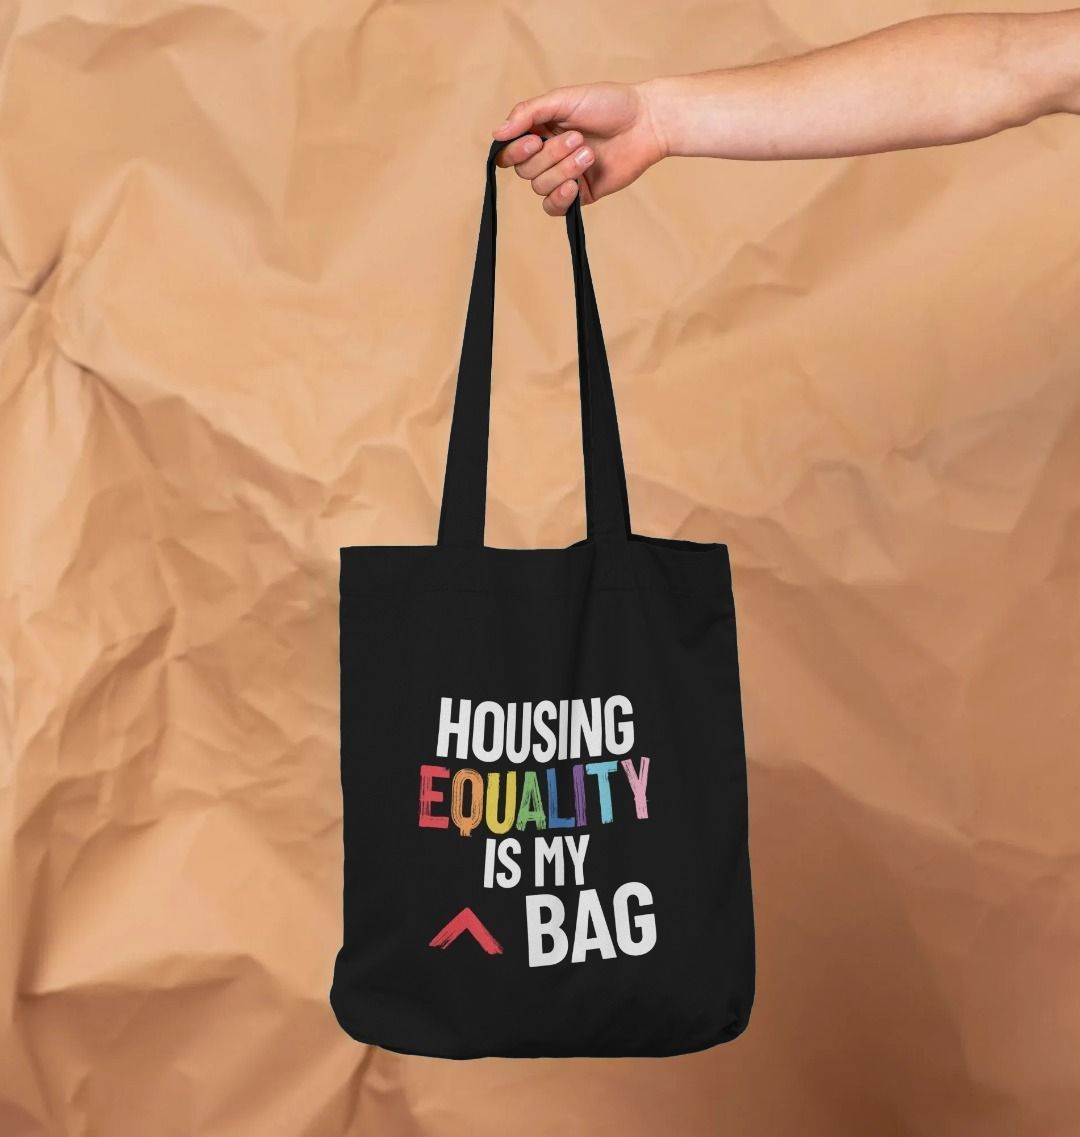 black tote bag design, with slogan in white bold text, the word equality is in the LGBTQ+ flag colours, bag reads "Housing equality is my bag"